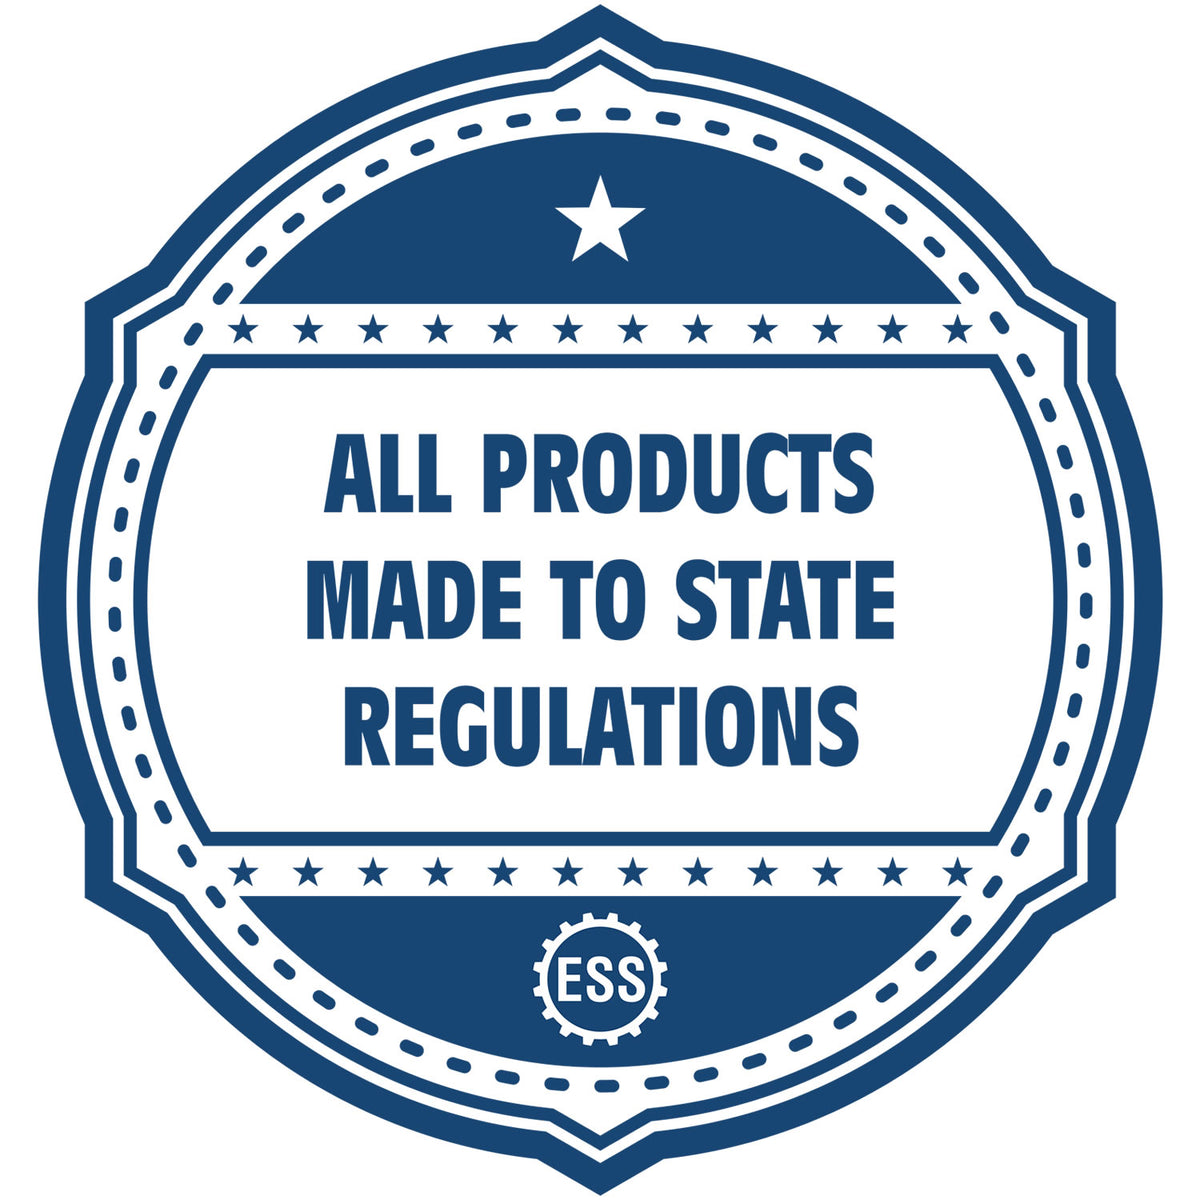 An icon or badge element for the Premium MaxLight Pre-Inked North Dakota Engineering Stamp showing that this product is made in compliance with state regulations.